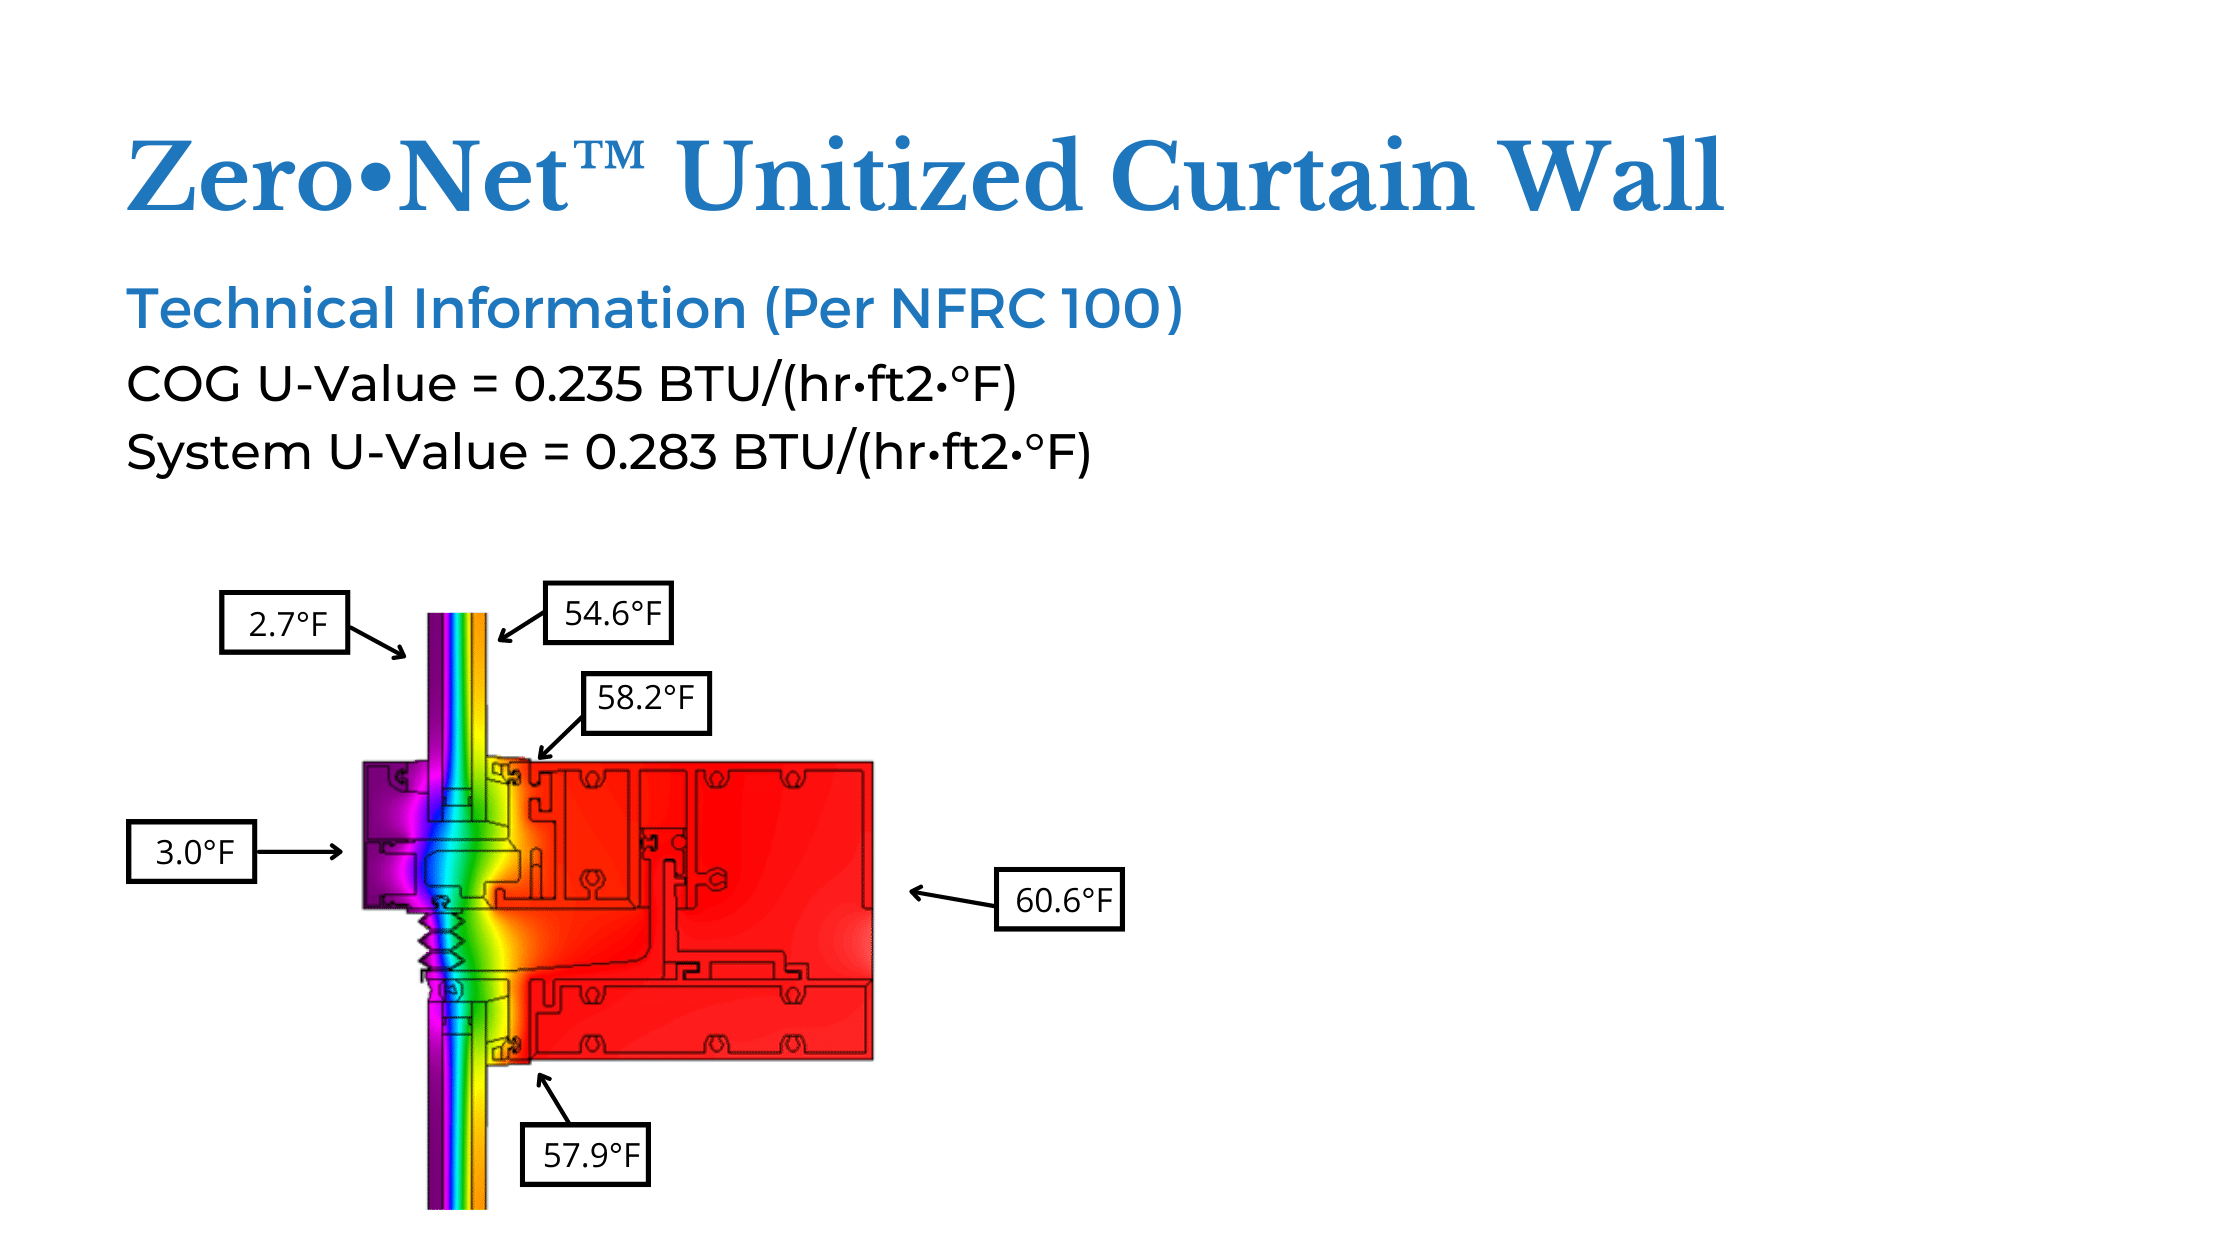 Unitized curtain wall thermal image